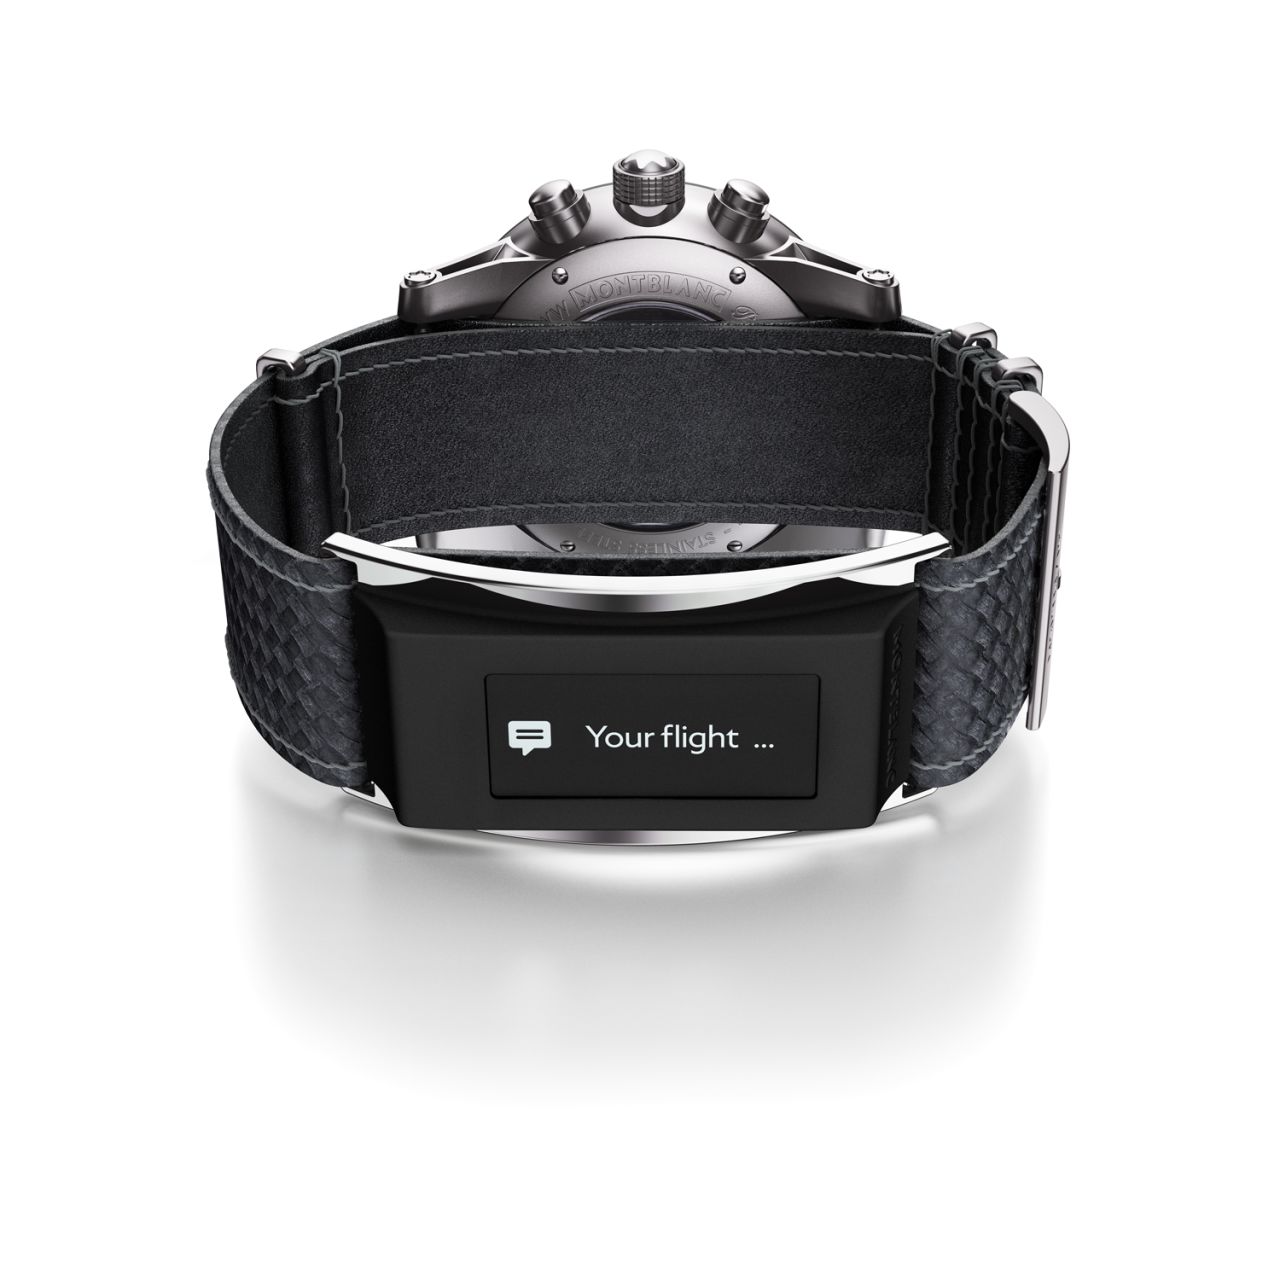 Although the showroom may have evinced the company's heritage, with the TimeWalker Urban Speed e-Strap, Montblanc is looking firmly to the future, bridging the worlds of traditional watchmaking and wearable technology. <br /><br />The interchangeable strap, which can be used with some Android phones and iOs devices, acts as an activity tracker, receives notifications, and can be used as a remote control.